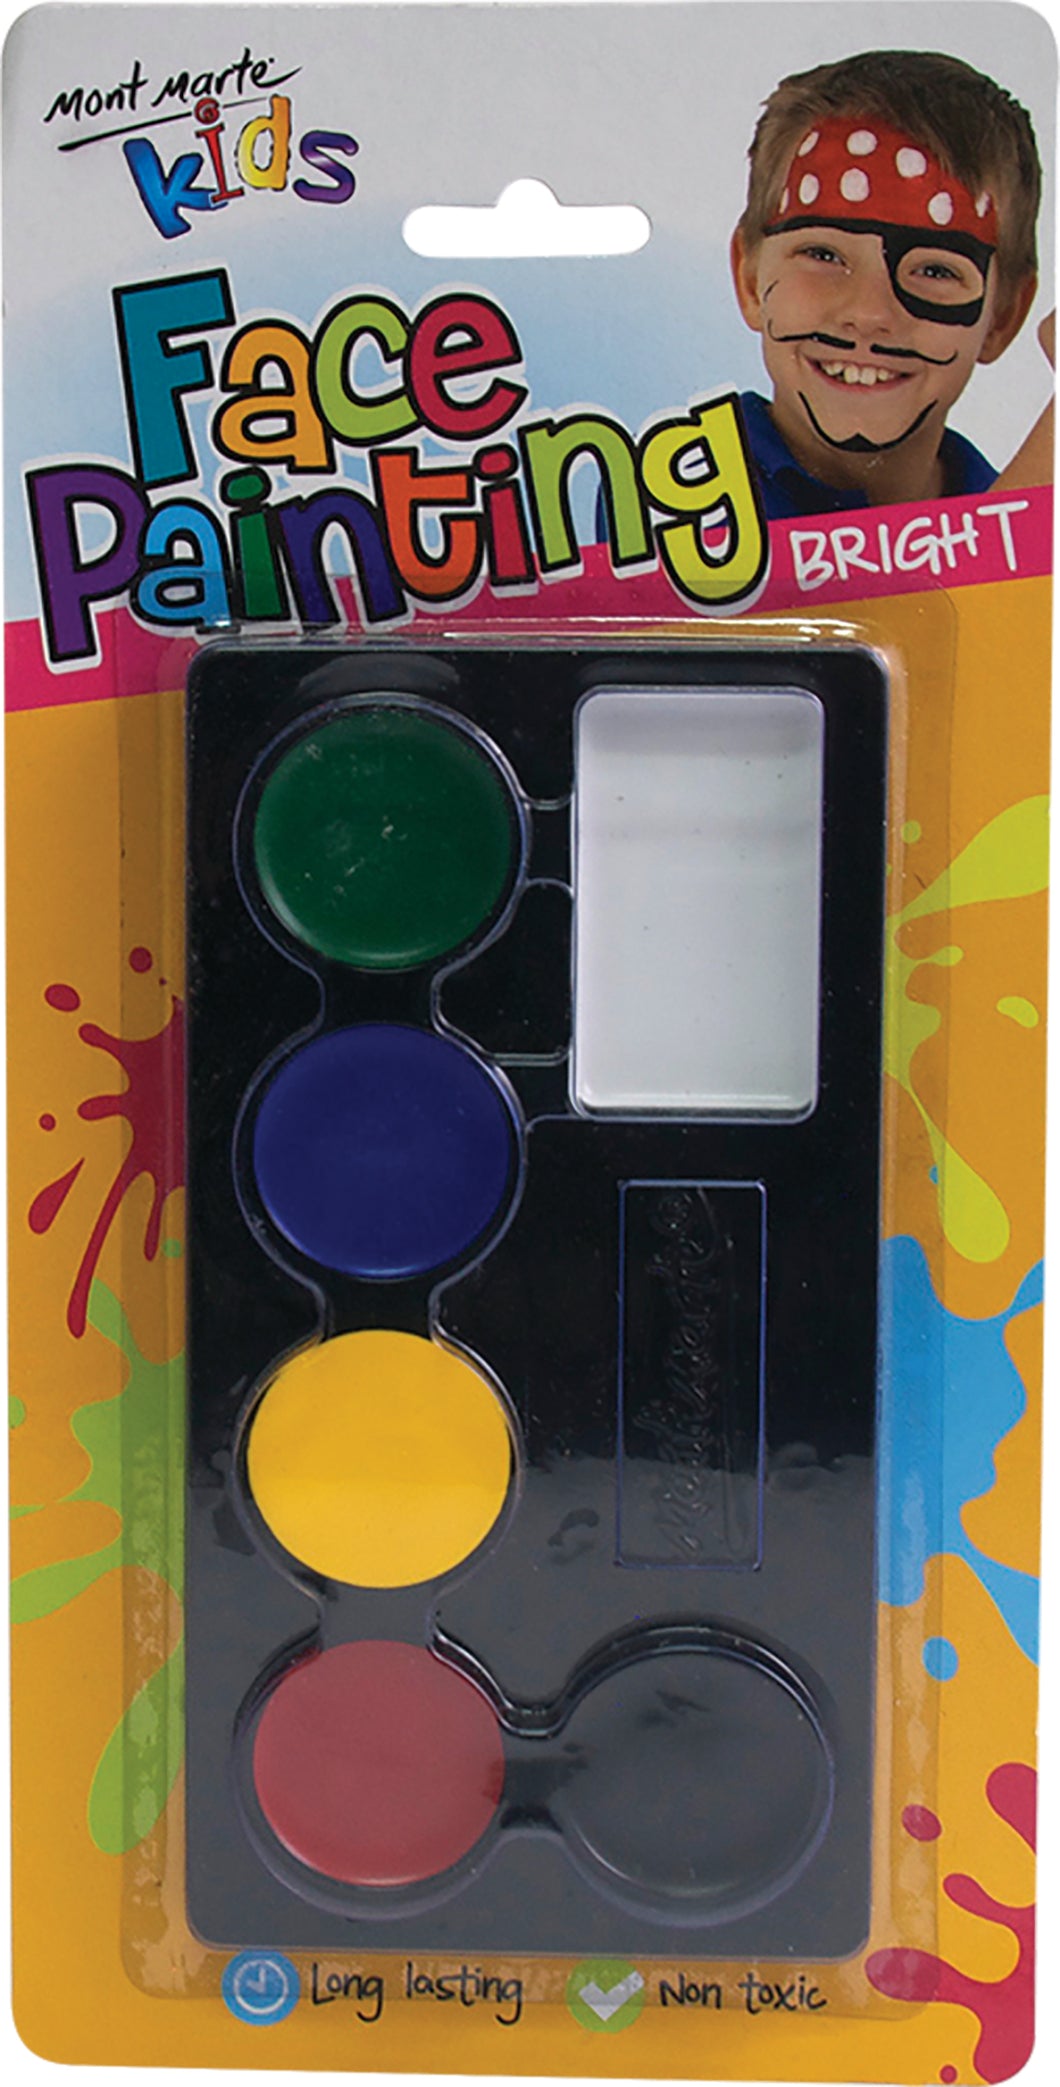 MM Kids Face Painting Set - Bright